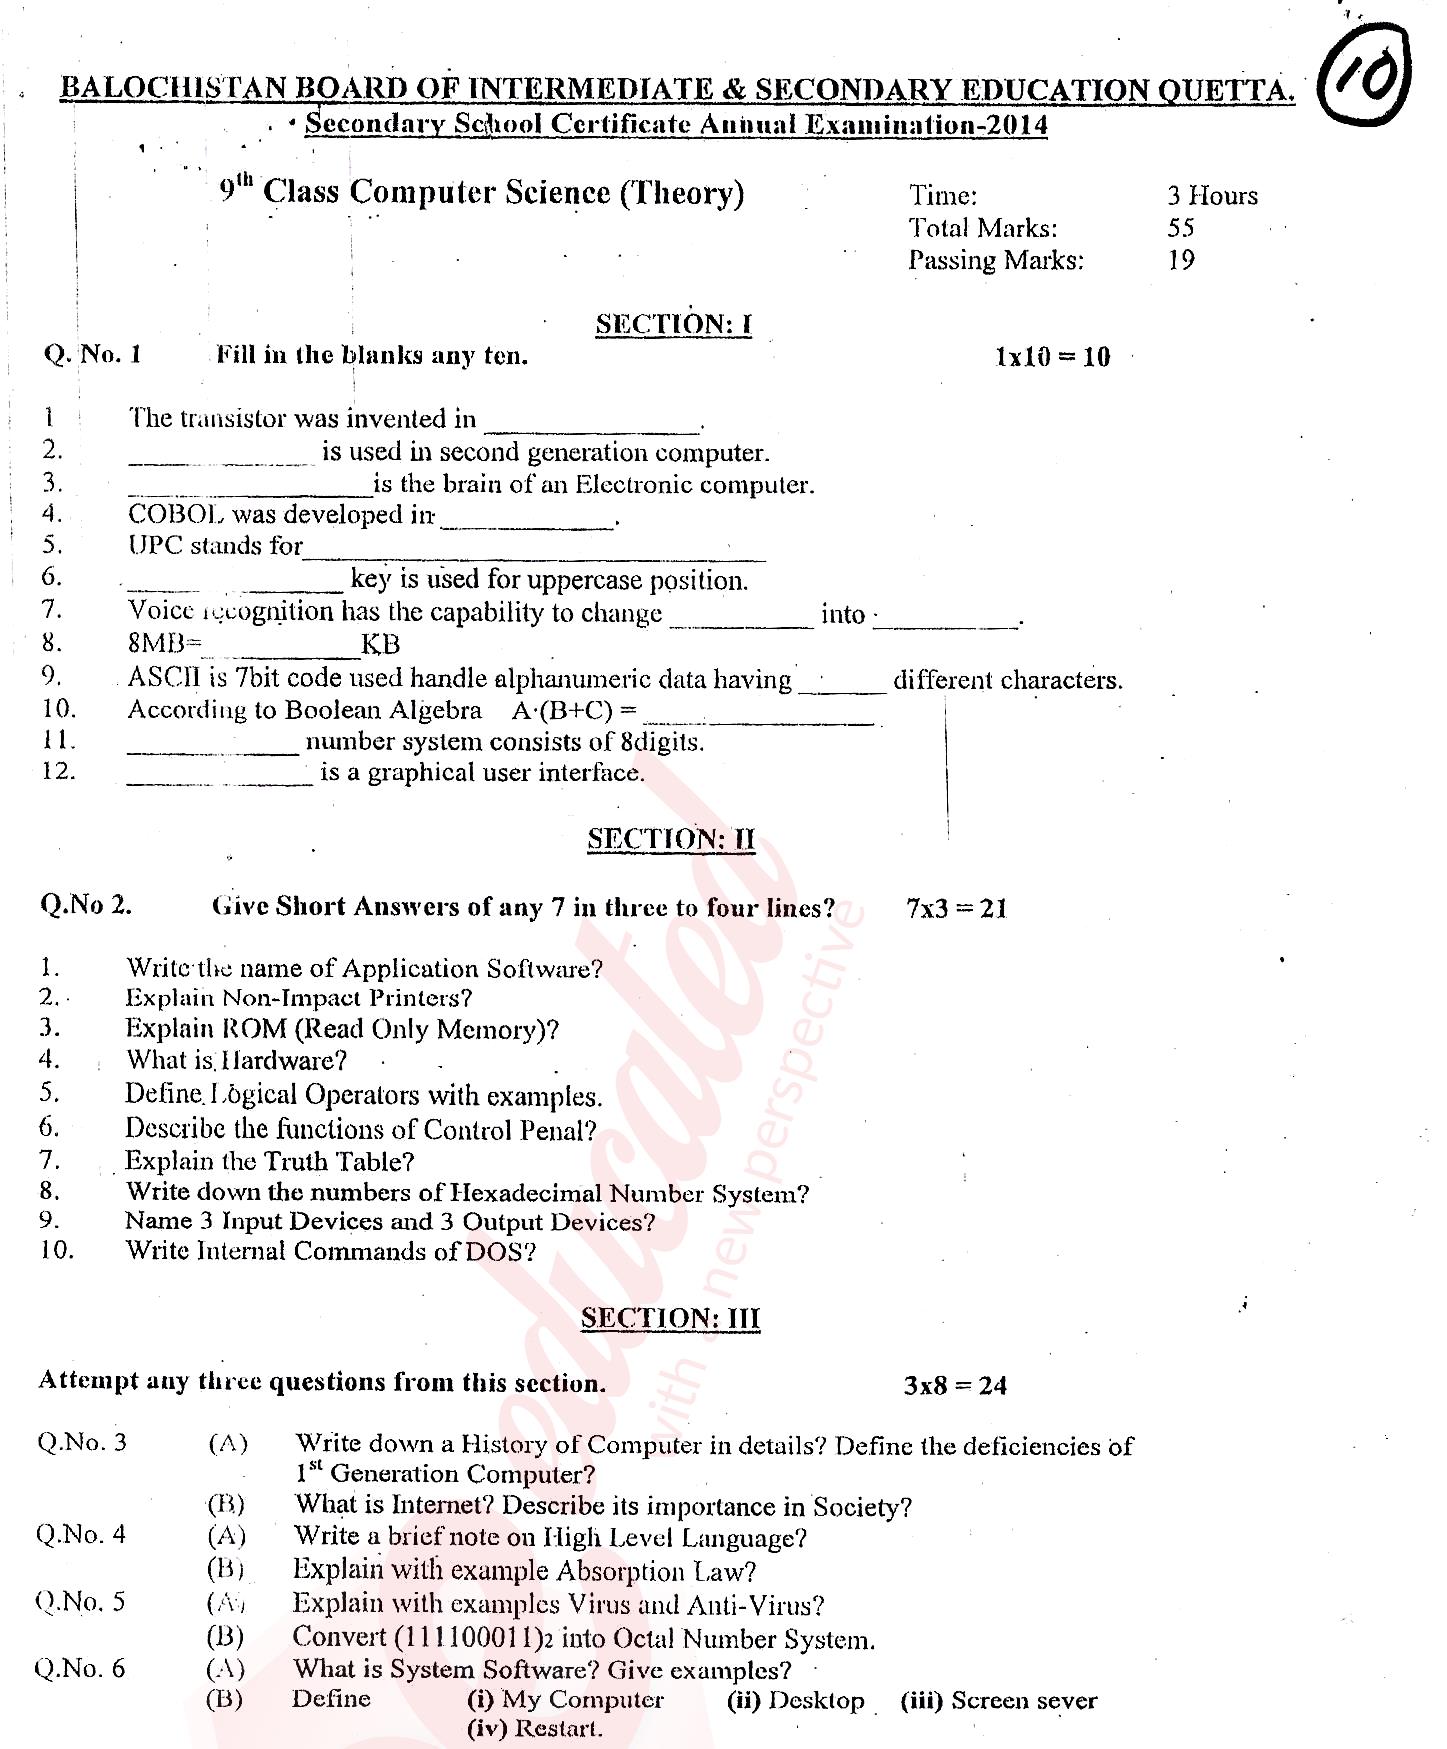 Computer Science 9th English Medium Past Paper Group 1 BISE Quetta 2014